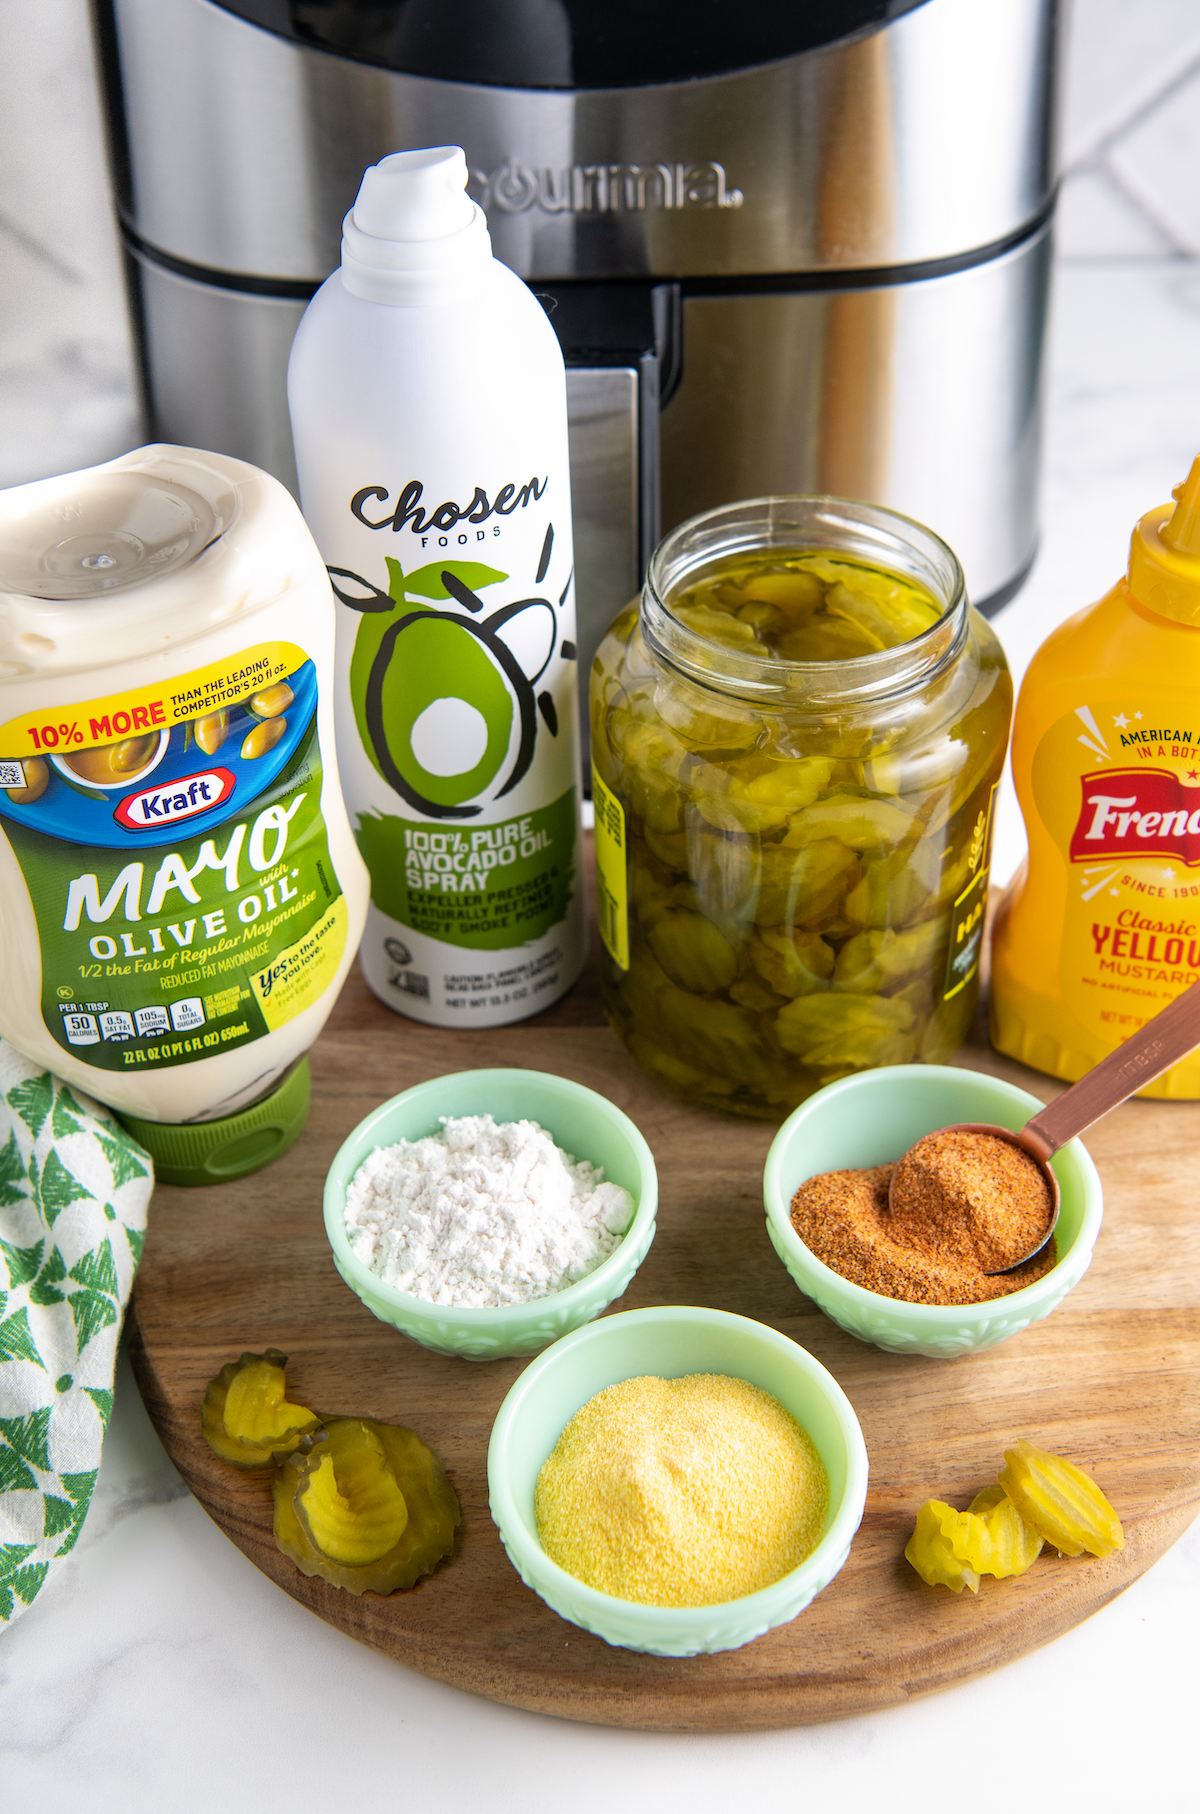 All the ingredients needed for air fryer fried pickles: a jar of pickles, a bottle of oil spray, a bottle of mustard, a bottle of mayo, a bowl of cornmeal, a bowl of flour, and a bowl of cajun seasoning